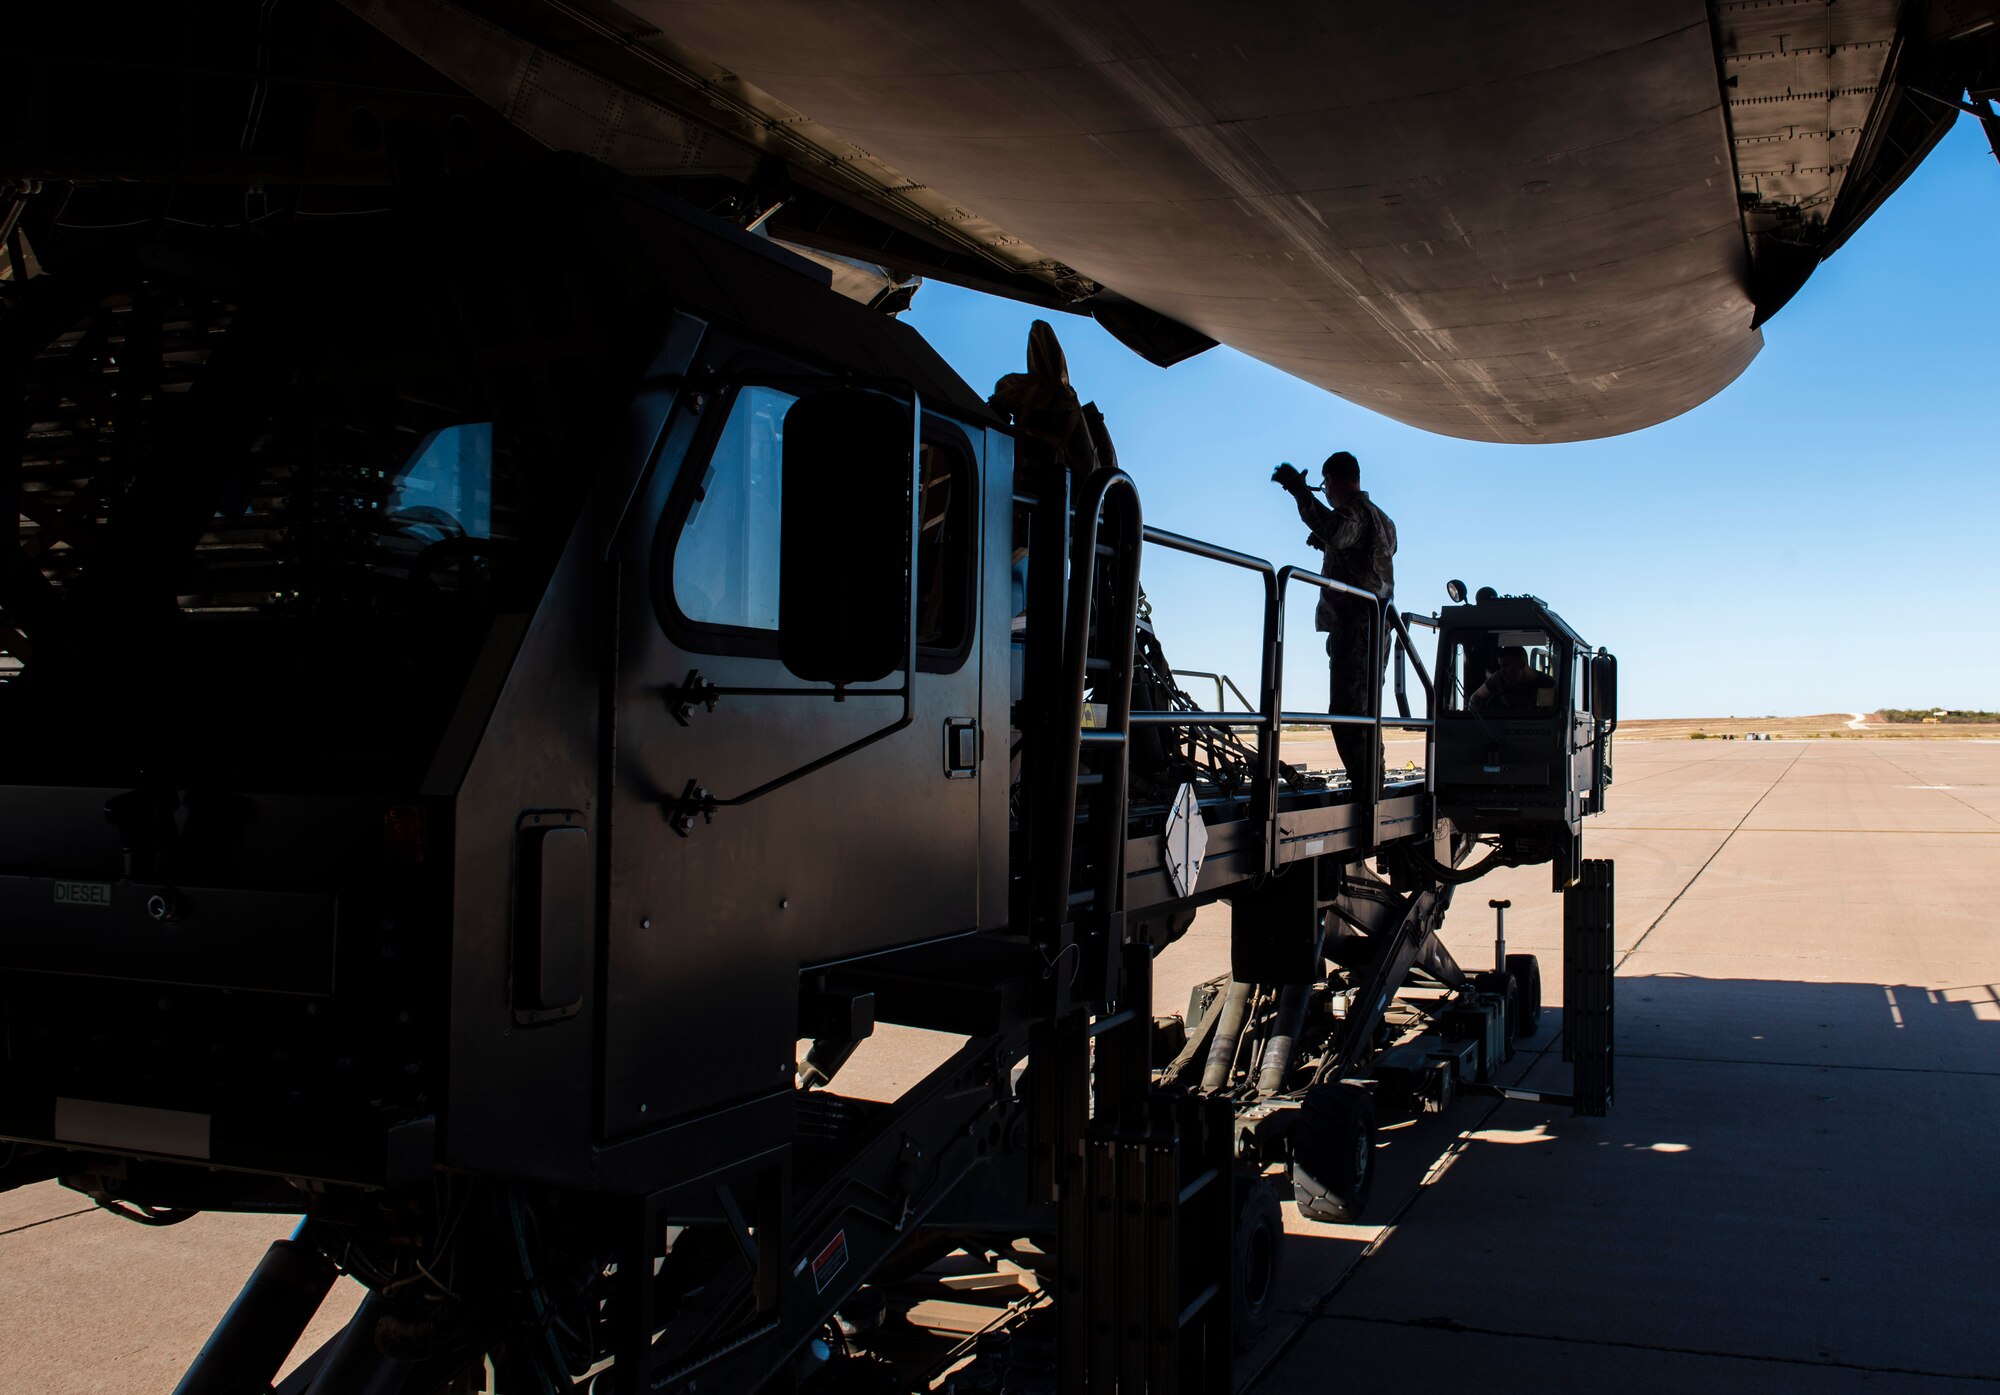 Staff Sgt. Zachary Parsons, 7th Logistics Readiness Squadron air transportation function noncommissioned officer in charge of training, guides cargo being unloaded from a C-5M Super Galaxy at Dyess Air Force Base, Texas, Nov. 25, 2020.